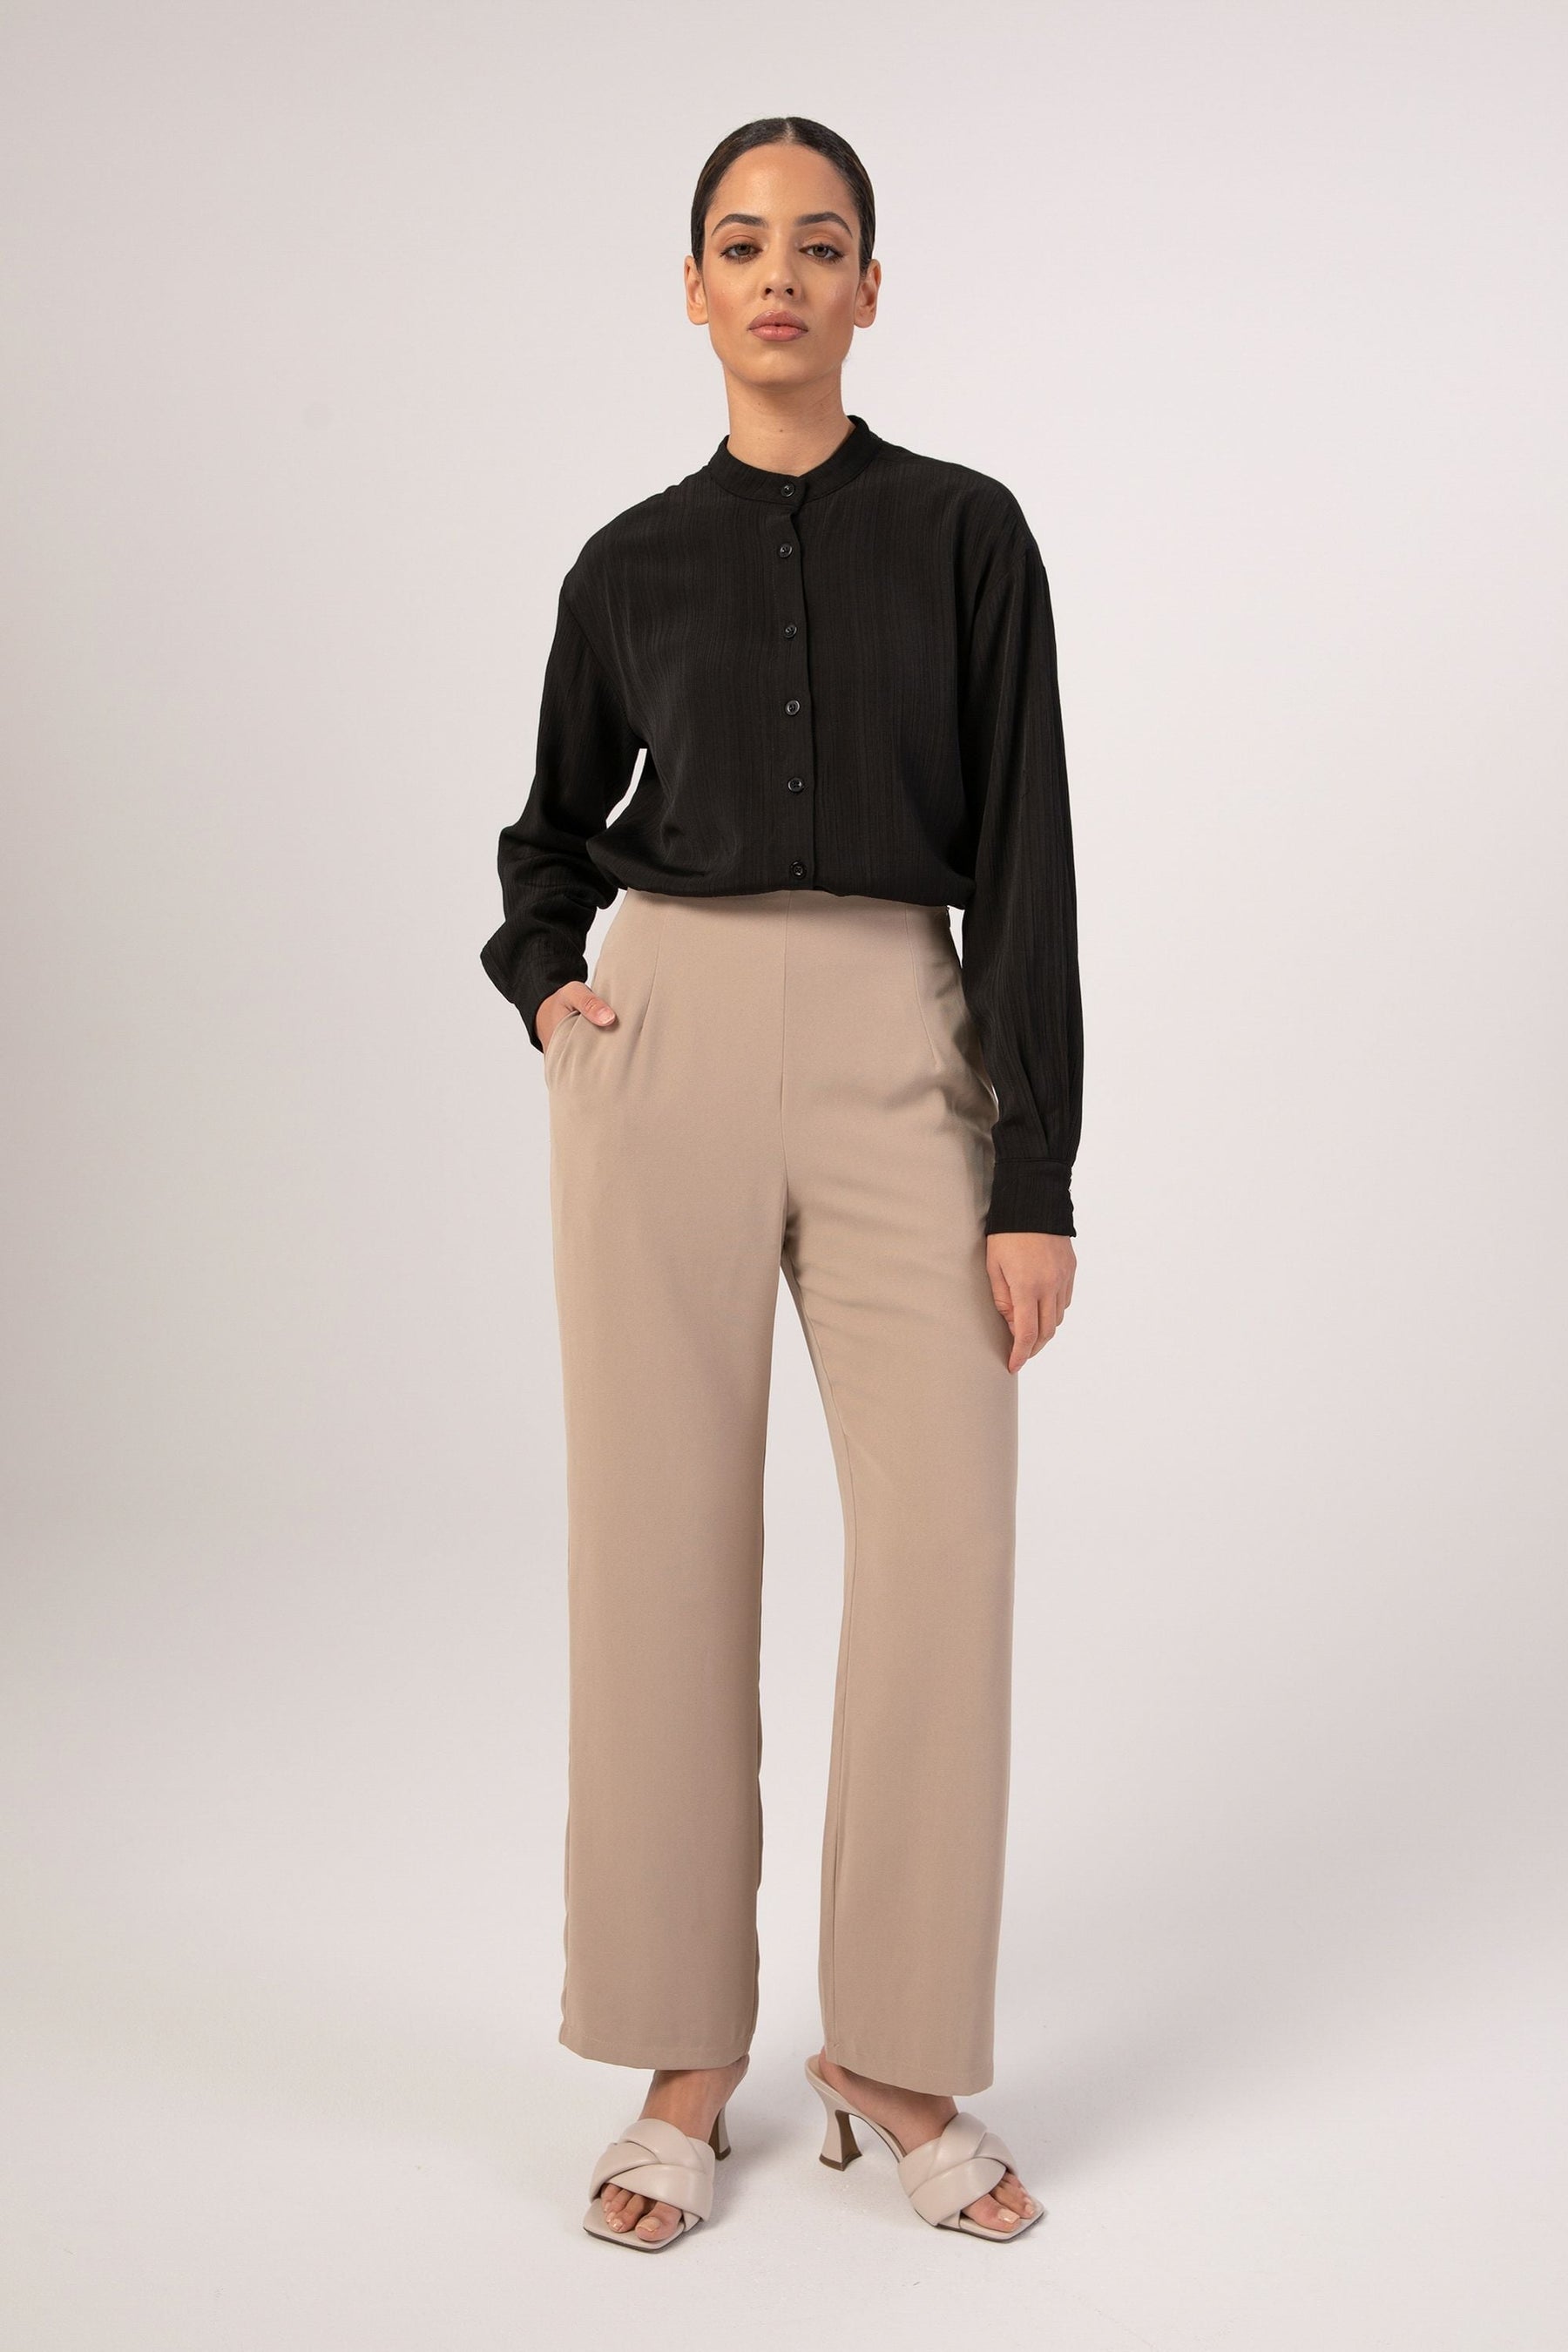 Seamless Waist Wide Leg Trousers - Sandstone Veiled Collection 